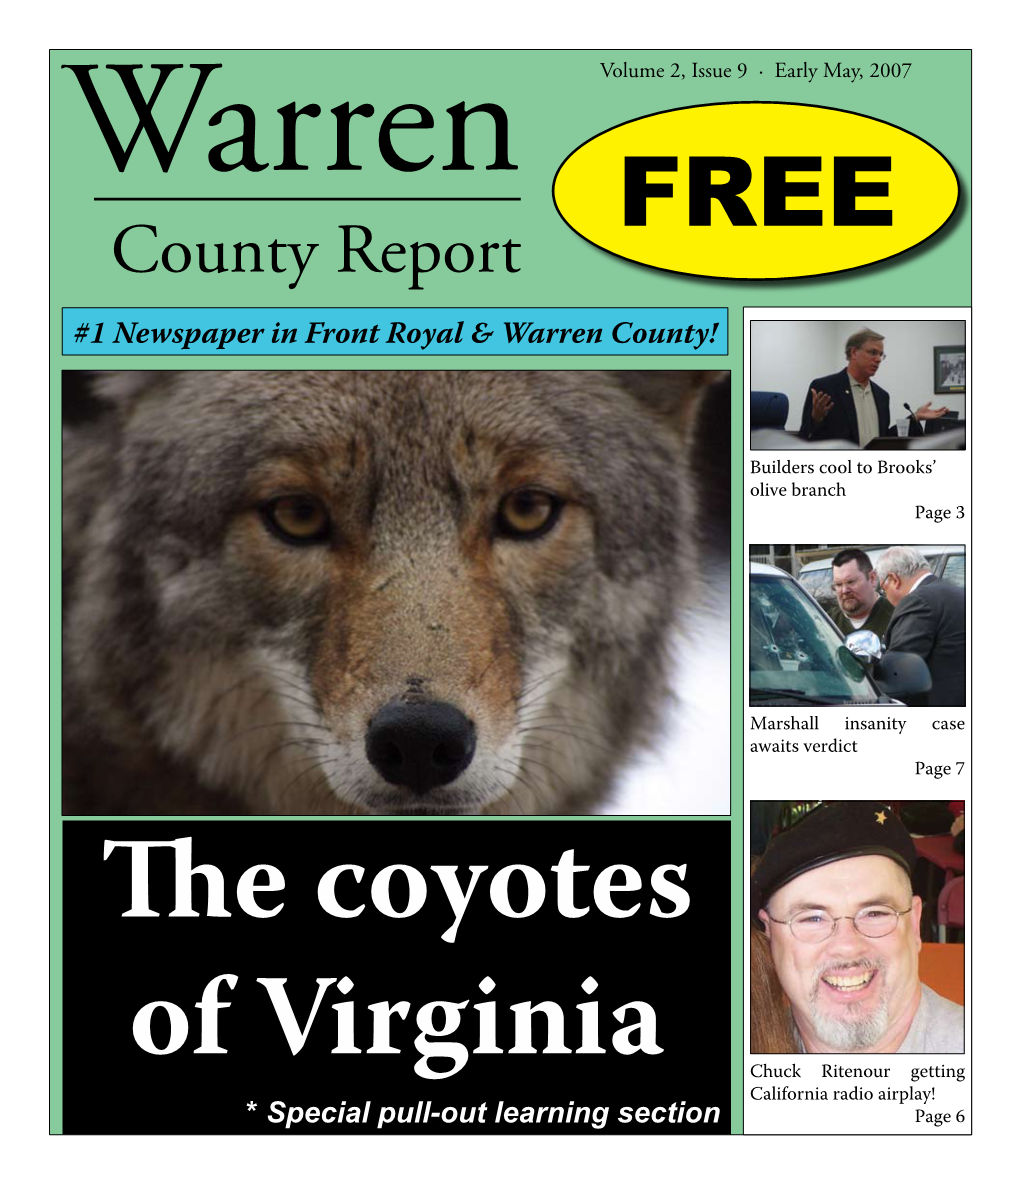 County Report